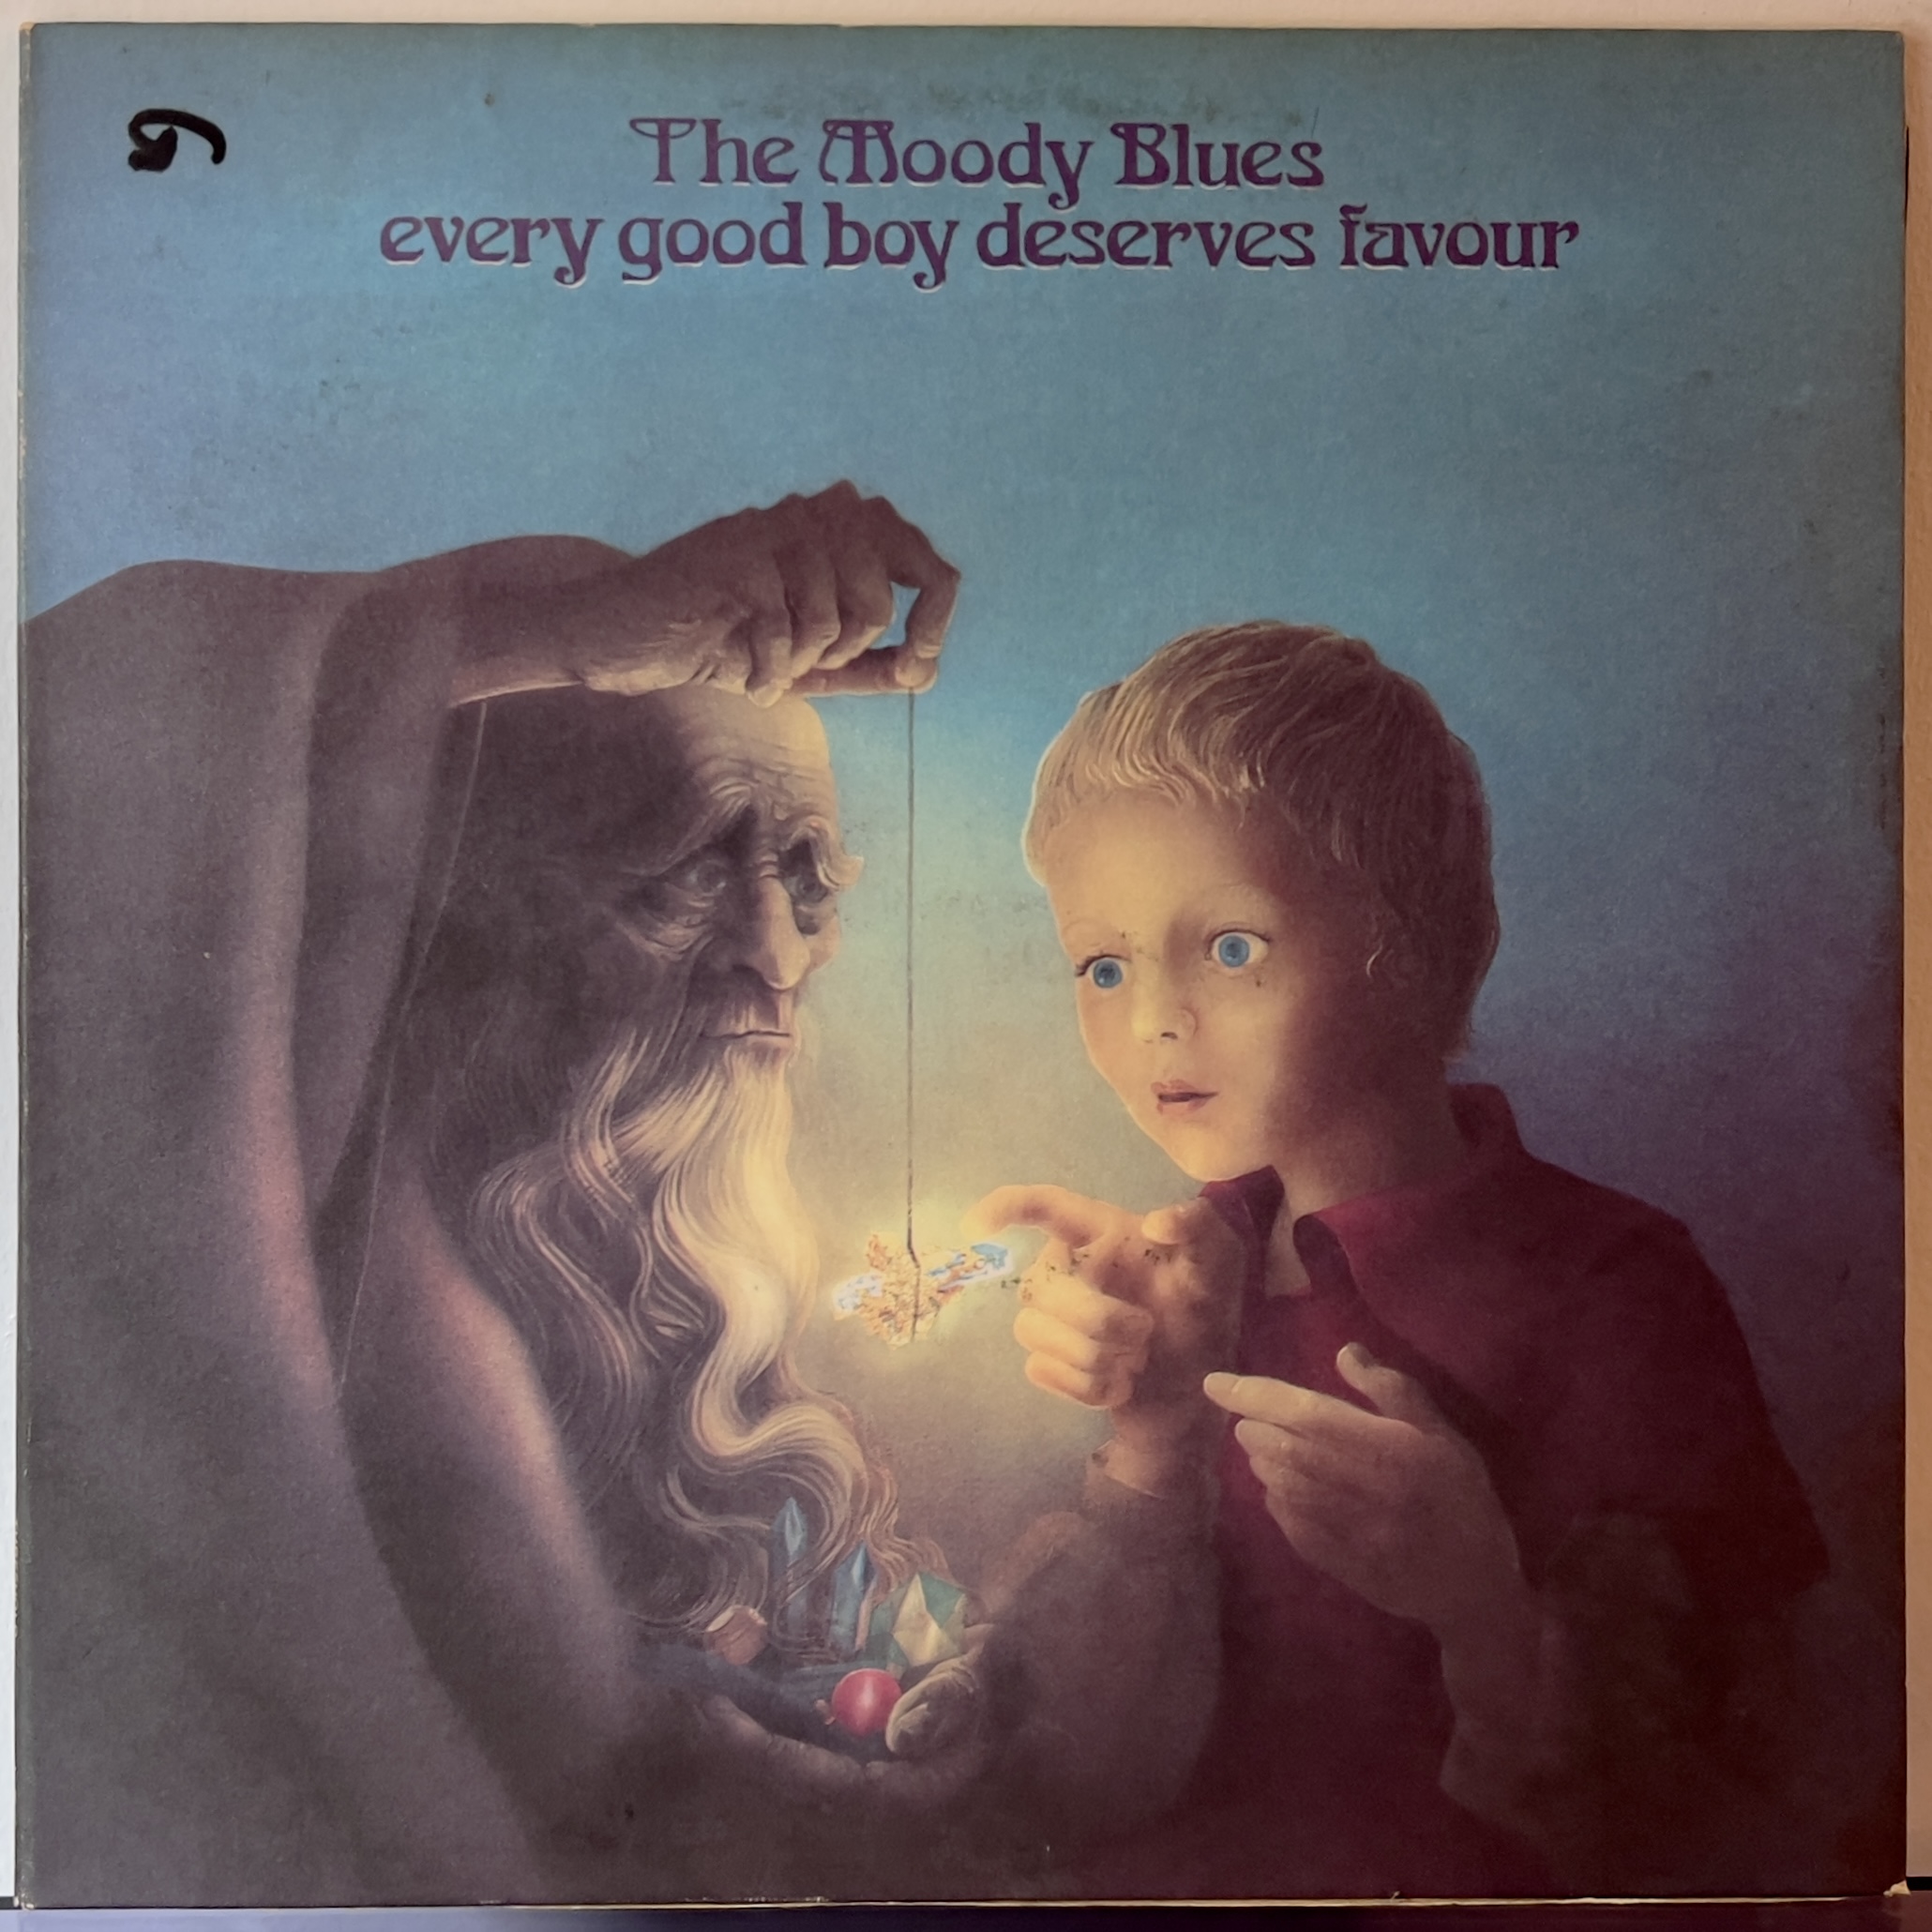 Every Good Boy Deserves Favour by The Moody Blues